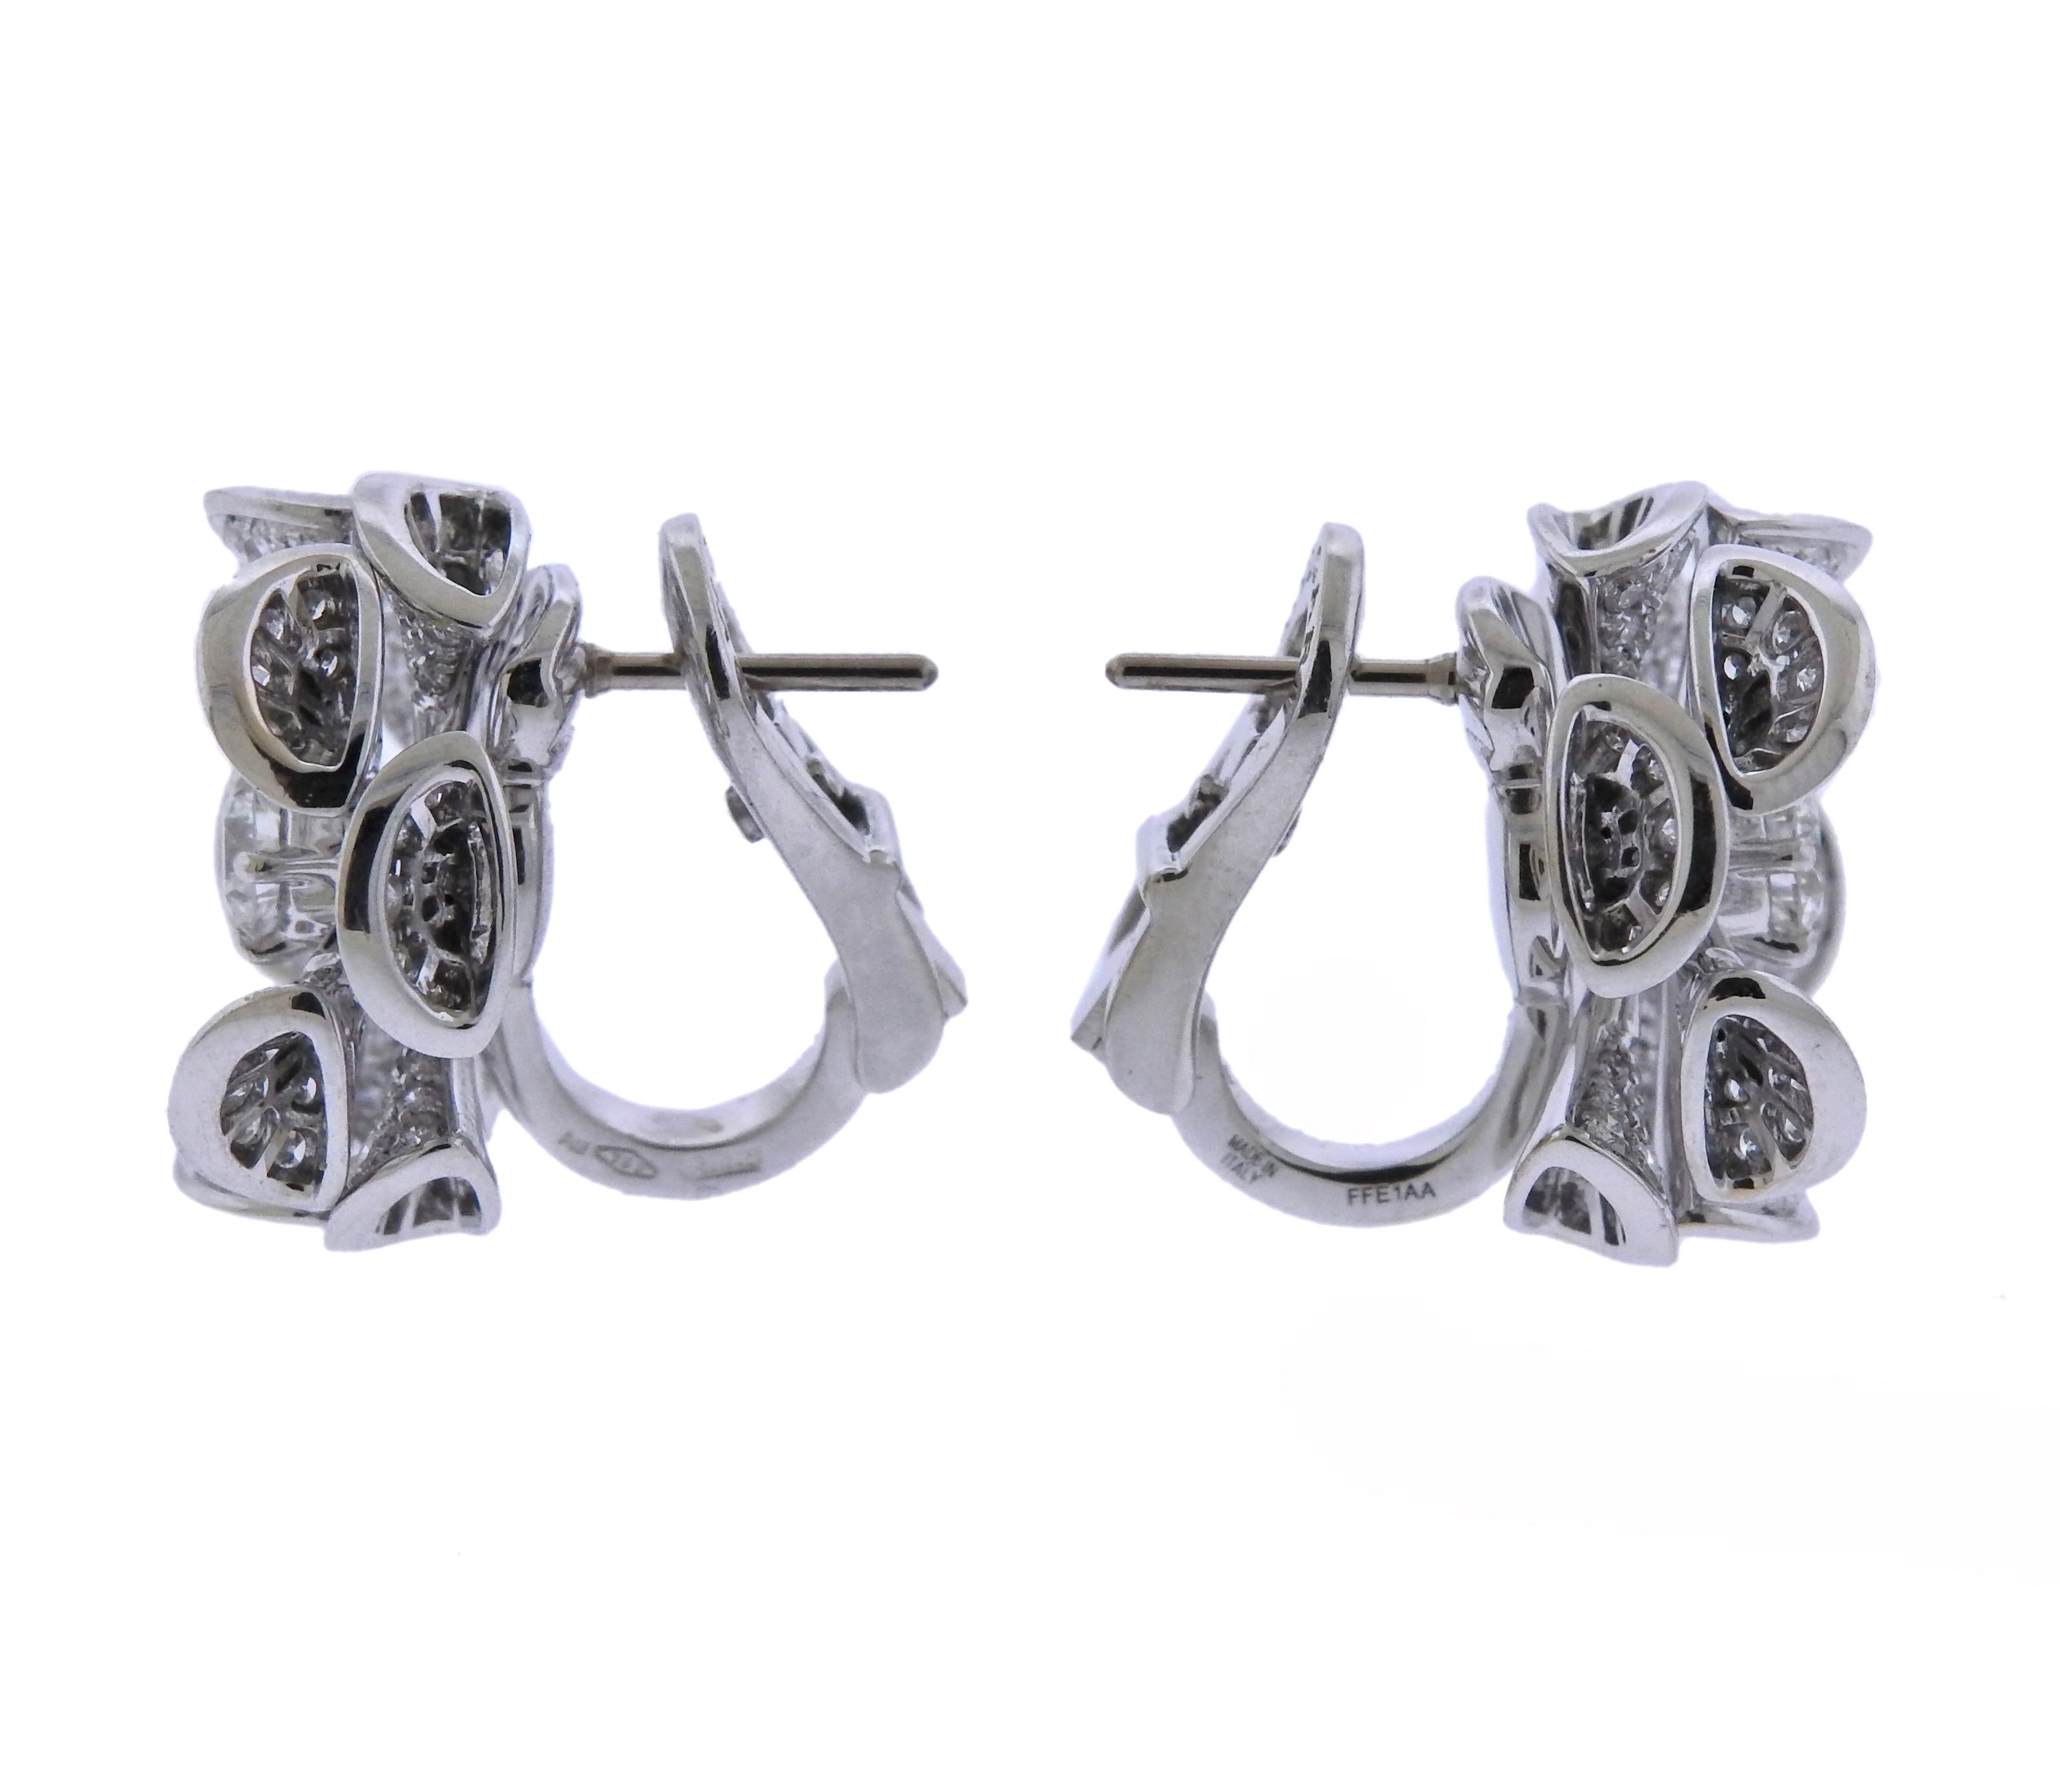 18k white gold earrings, crafted by Bulgari for Diva's Dream collection, adorned with approx. 2.00ctw in G/VS diamonds. Current retail $21200. Bvlgari ref. 350785. Earrings are 18mm in diameter , weigh 18.2 grams. Marked: Bvlgari, made in Italy,